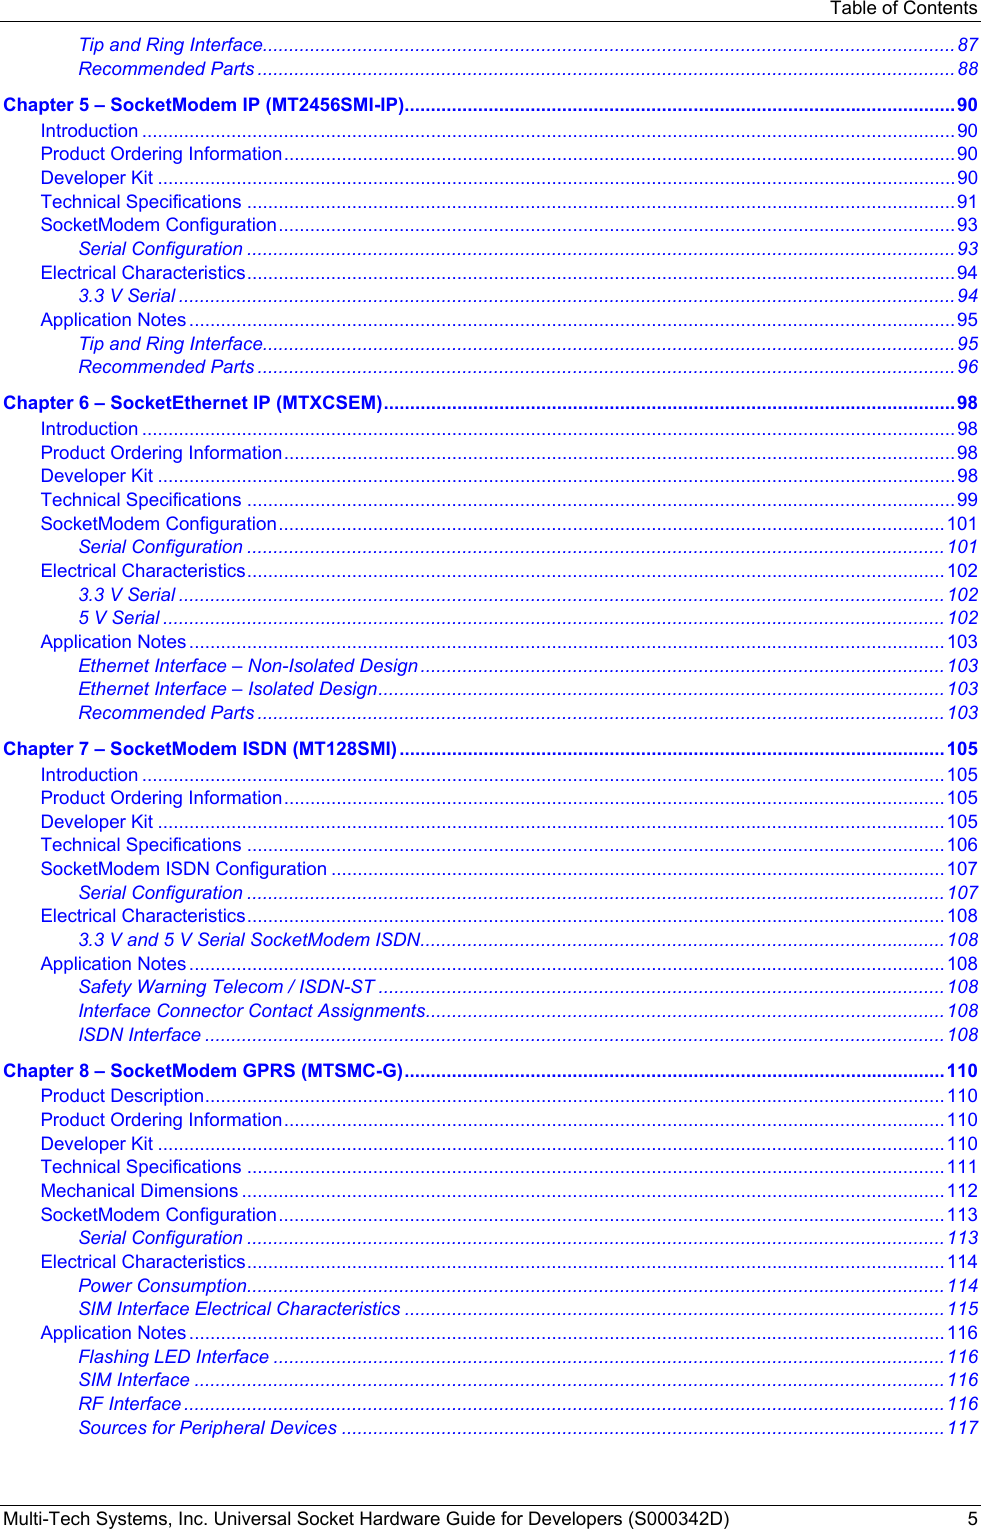 Table of Contents Multi-Tech Systems, Inc. Universal Socket Hardware Guide for Developers (S000342D)  5 Tip and Ring Interface....................................................................................................................................87 Recommended Parts .....................................................................................................................................88 Chapter 5 – SocketModem IP (MT2456SMI-IP).........................................................................................................90 Introduction ...........................................................................................................................................................90 Product Ordering Information................................................................................................................................90 Developer Kit ........................................................................................................................................................90 Technical Specifications .......................................................................................................................................91 SocketModem Configuration.................................................................................................................................93 Serial Configuration .......................................................................................................................................93 Electrical Characteristics.......................................................................................................................................94 3.3 V Serial ....................................................................................................................................................94 Application Notes ..................................................................................................................................................95 Tip and Ring Interface....................................................................................................................................95 Recommended Parts .....................................................................................................................................96 Chapter 6 – SocketEthernet IP (MTXCSEM).............................................................................................................98 Introduction ...........................................................................................................................................................98 Product Ordering Information................................................................................................................................98 Developer Kit ........................................................................................................................................................98 Technical Specifications .......................................................................................................................................99 SocketModem Configuration...............................................................................................................................101 Serial Configuration .....................................................................................................................................101 Electrical Characteristics.....................................................................................................................................102 3.3 V Serial ..................................................................................................................................................102 5 V Serial .....................................................................................................................................................102 Application Notes ................................................................................................................................................103 Ethernet Interface – Non-Isolated Design .................................................................................................... 103 Ethernet Interface – Isolated Design............................................................................................................103 Recommended Parts ...................................................................................................................................103 Chapter 7 – SocketModem ISDN (MT128SMI) ........................................................................................................105 Introduction .........................................................................................................................................................105 Product Ordering Information..............................................................................................................................105 Developer Kit ......................................................................................................................................................105 Technical Specifications .....................................................................................................................................106 SocketModem ISDN Configuration .....................................................................................................................107 Serial Configuration .....................................................................................................................................107 Electrical Characteristics.....................................................................................................................................108 3.3 V and 5 V Serial SocketModem ISDN....................................................................................................108 Application Notes ................................................................................................................................................108 Safety Warning Telecom / ISDN-ST ............................................................................................................ 108 Interface Connector Contact Assignments...................................................................................................108 ISDN Interface .............................................................................................................................................108 Chapter 8 – SocketModem GPRS (MTSMC-G).......................................................................................................110 Product Description.............................................................................................................................................110 Product Ordering Information..............................................................................................................................110 Developer Kit ......................................................................................................................................................110 Technical Specifications .....................................................................................................................................111 Mechanical Dimensions ......................................................................................................................................112 SocketModem Configuration...............................................................................................................................113 Serial Configuration .....................................................................................................................................113 Electrical Characteristics.....................................................................................................................................114 Power Consumption.....................................................................................................................................114 SIM Interface Electrical Characteristics .......................................................................................................115 Application Notes ................................................................................................................................................116 Flashing LED Interface ................................................................................................................................116 SIM Interface ...............................................................................................................................................116 RF Interface .................................................................................................................................................116 Sources for Peripheral Devices ...................................................................................................................117 